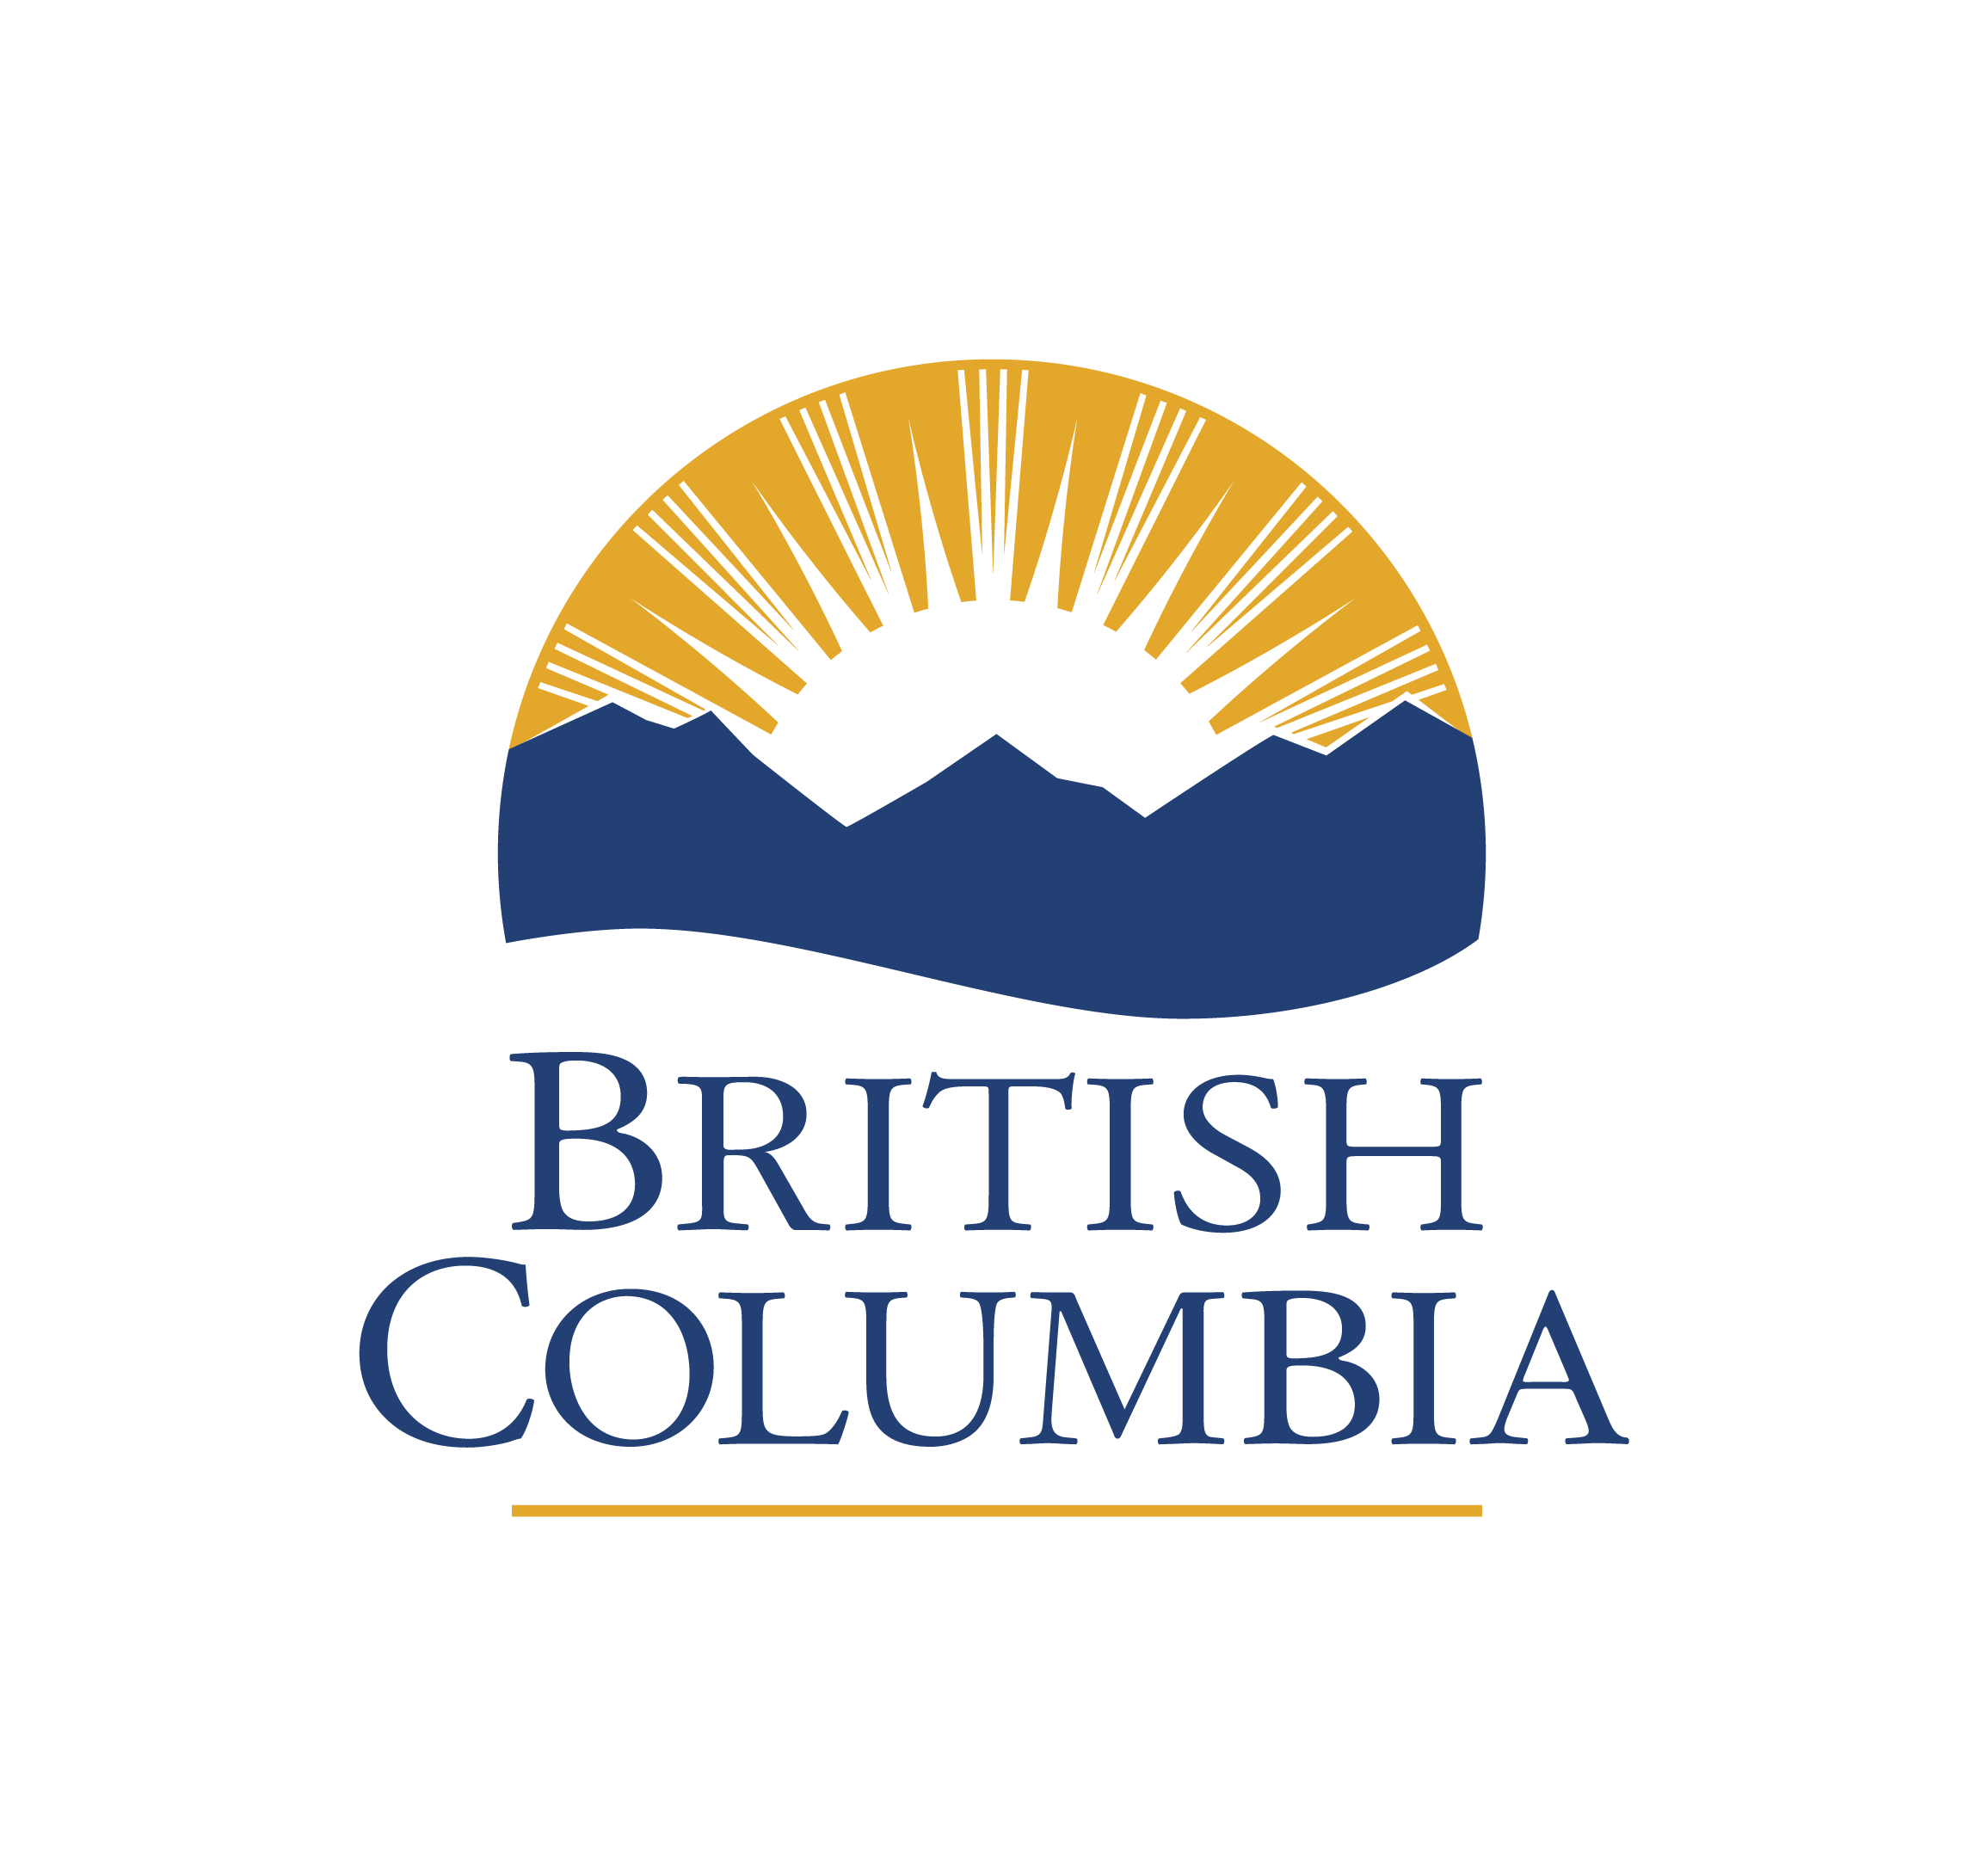 The Government of British Columbia's Logo features a symbol of the sun rising behind a mountain range with the Pacific Ocean.